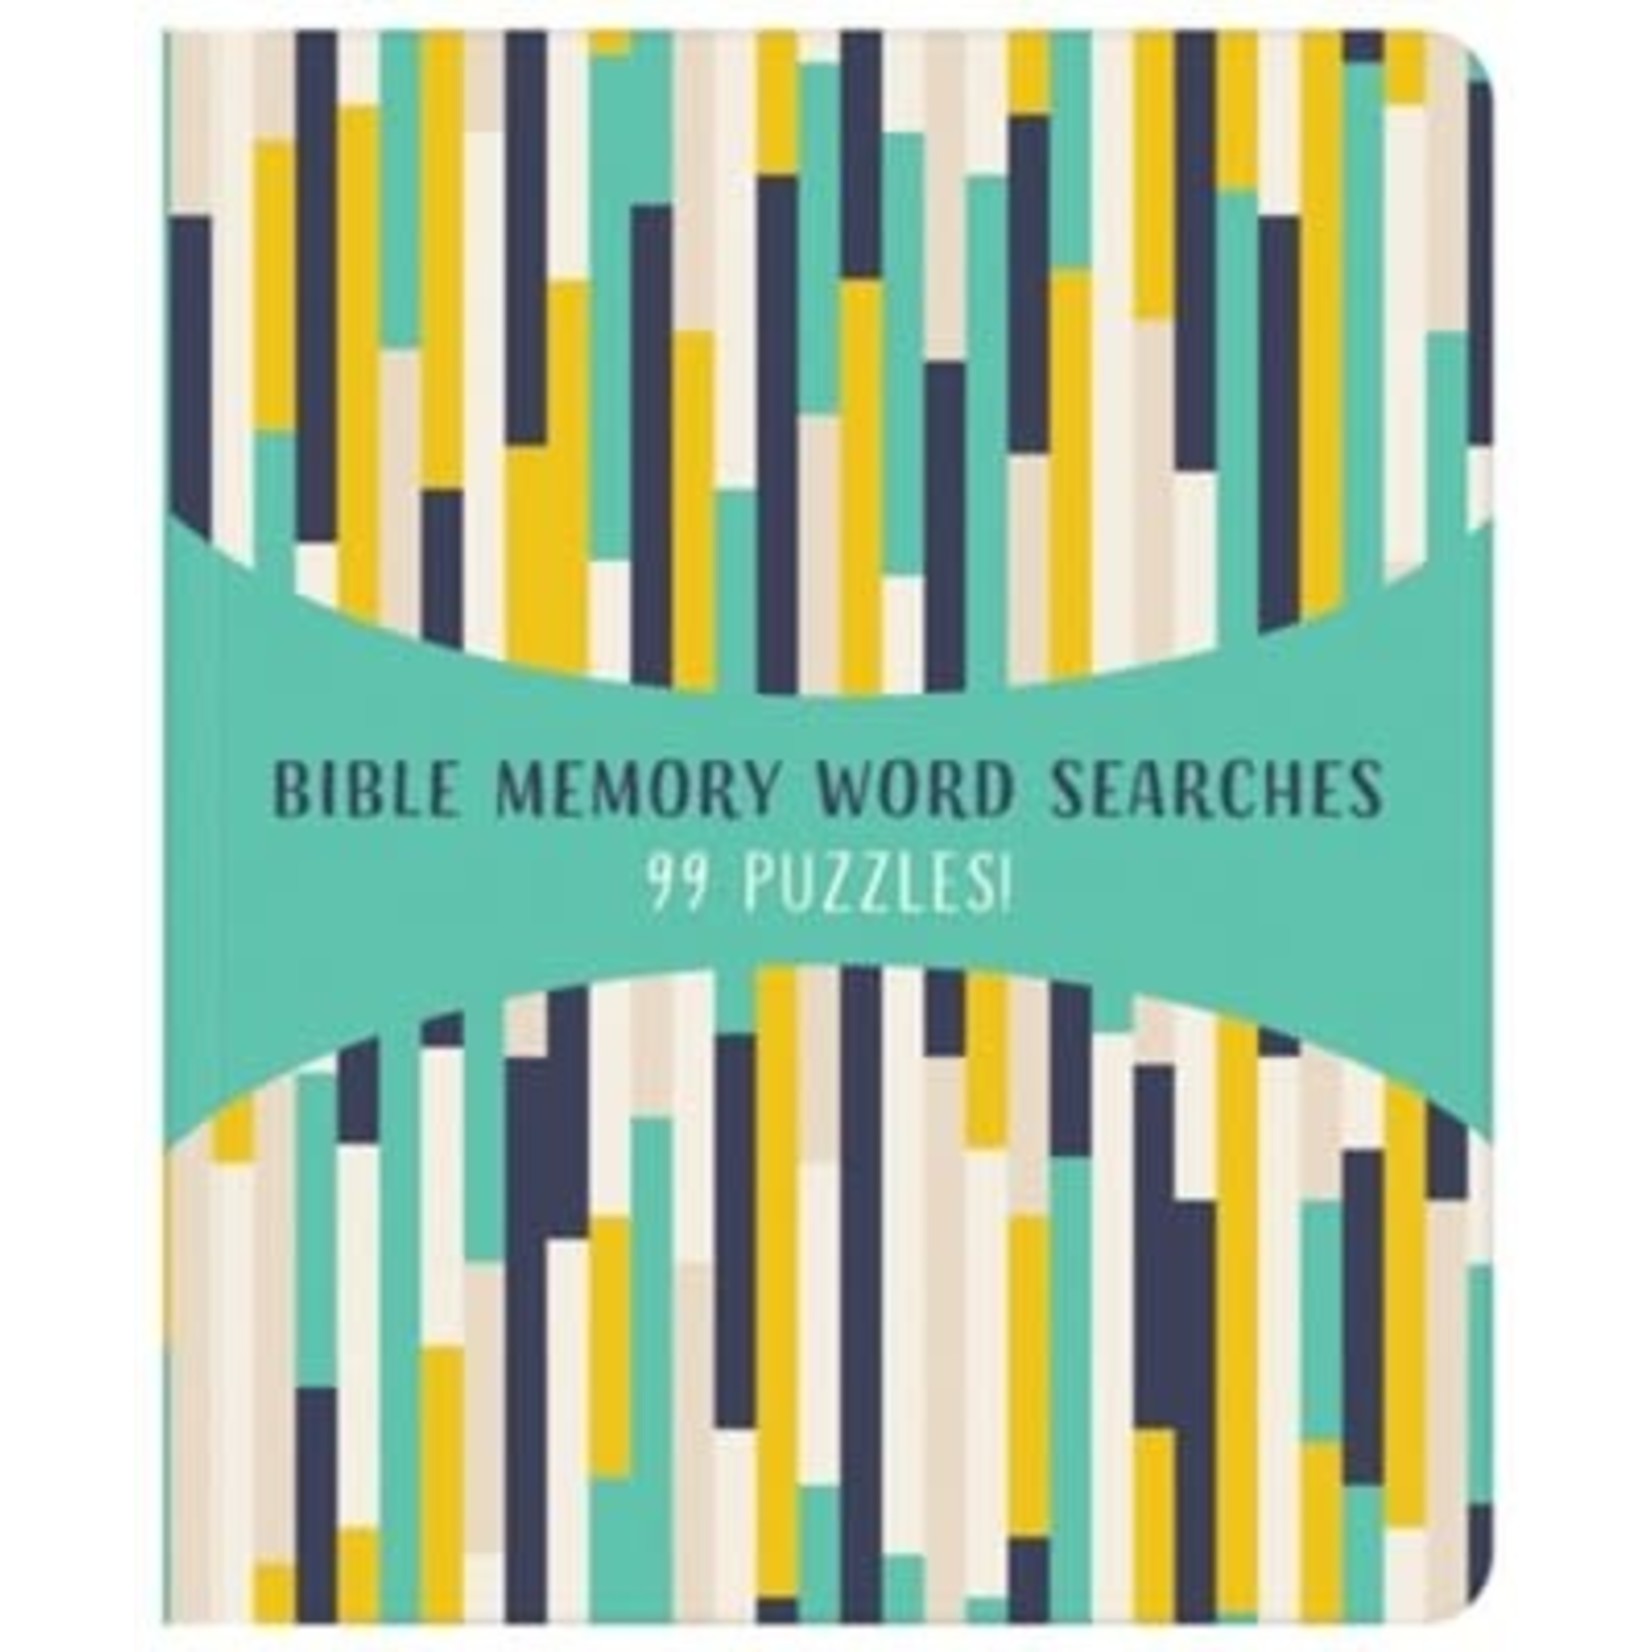 Bible Memory Word Searches - 99 Puzzles